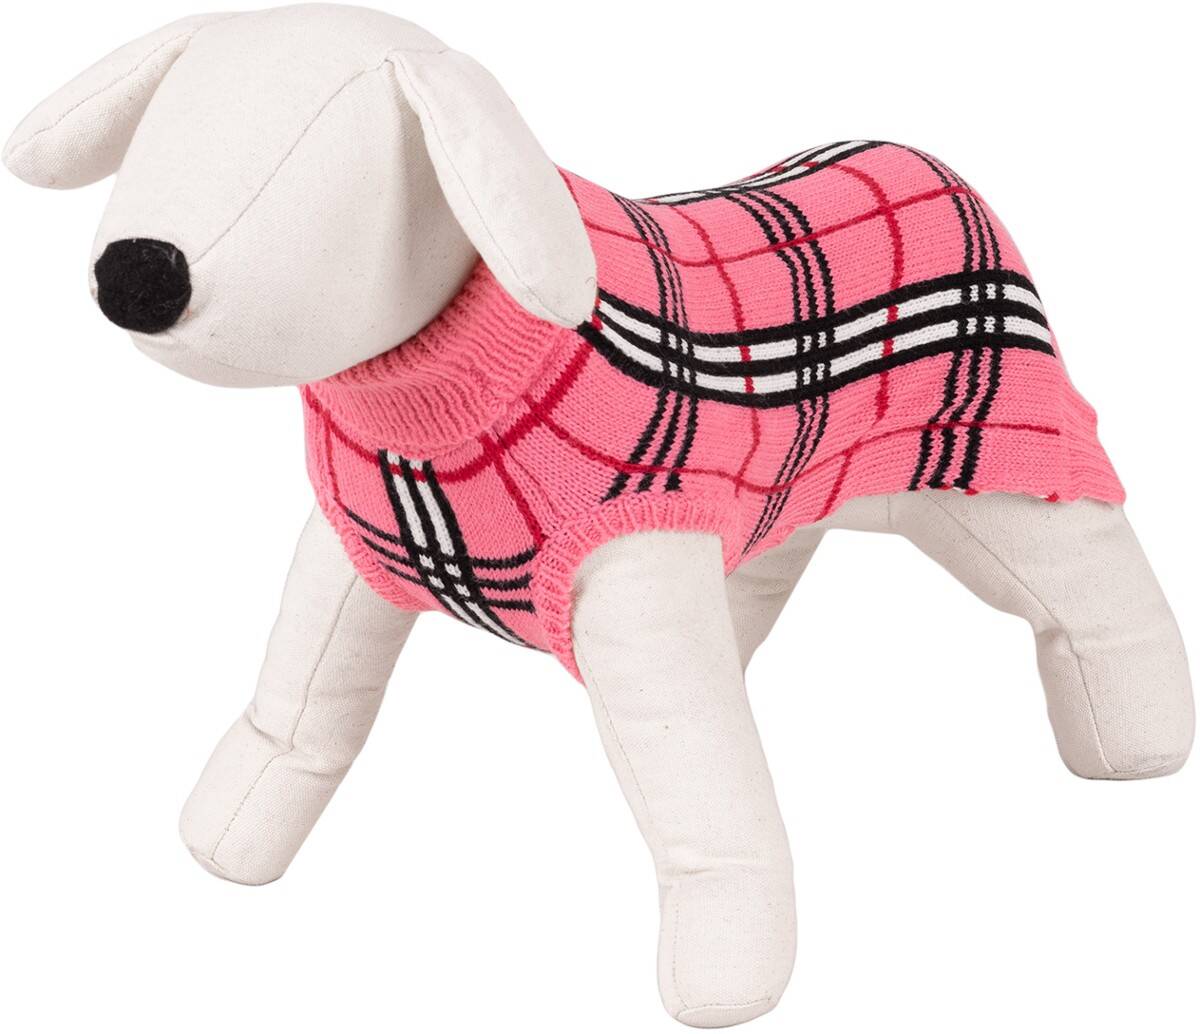 Dog Sweater / Checkered Pattern - Happet 470S - Pink S - 25cm